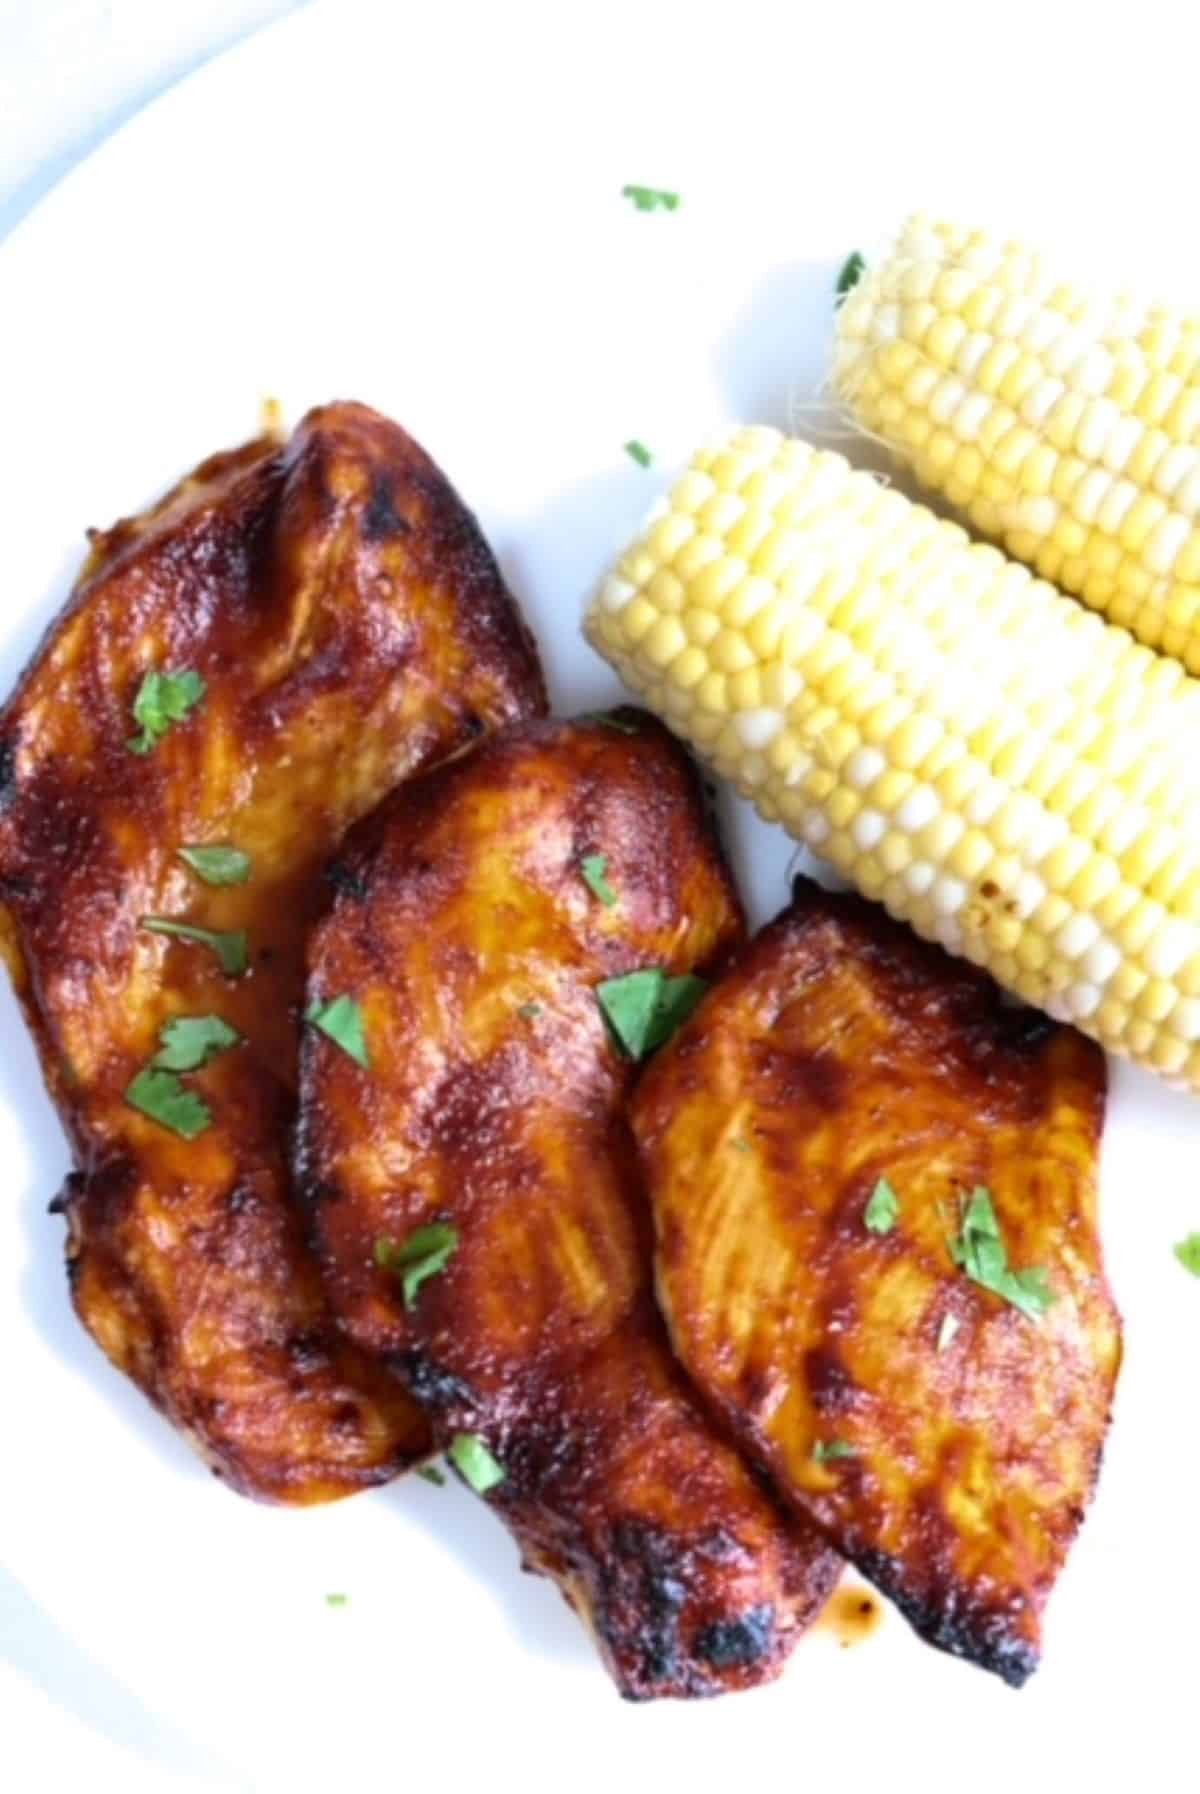 Three pieces of barbecue chicken with two ears of corn on a white plate.